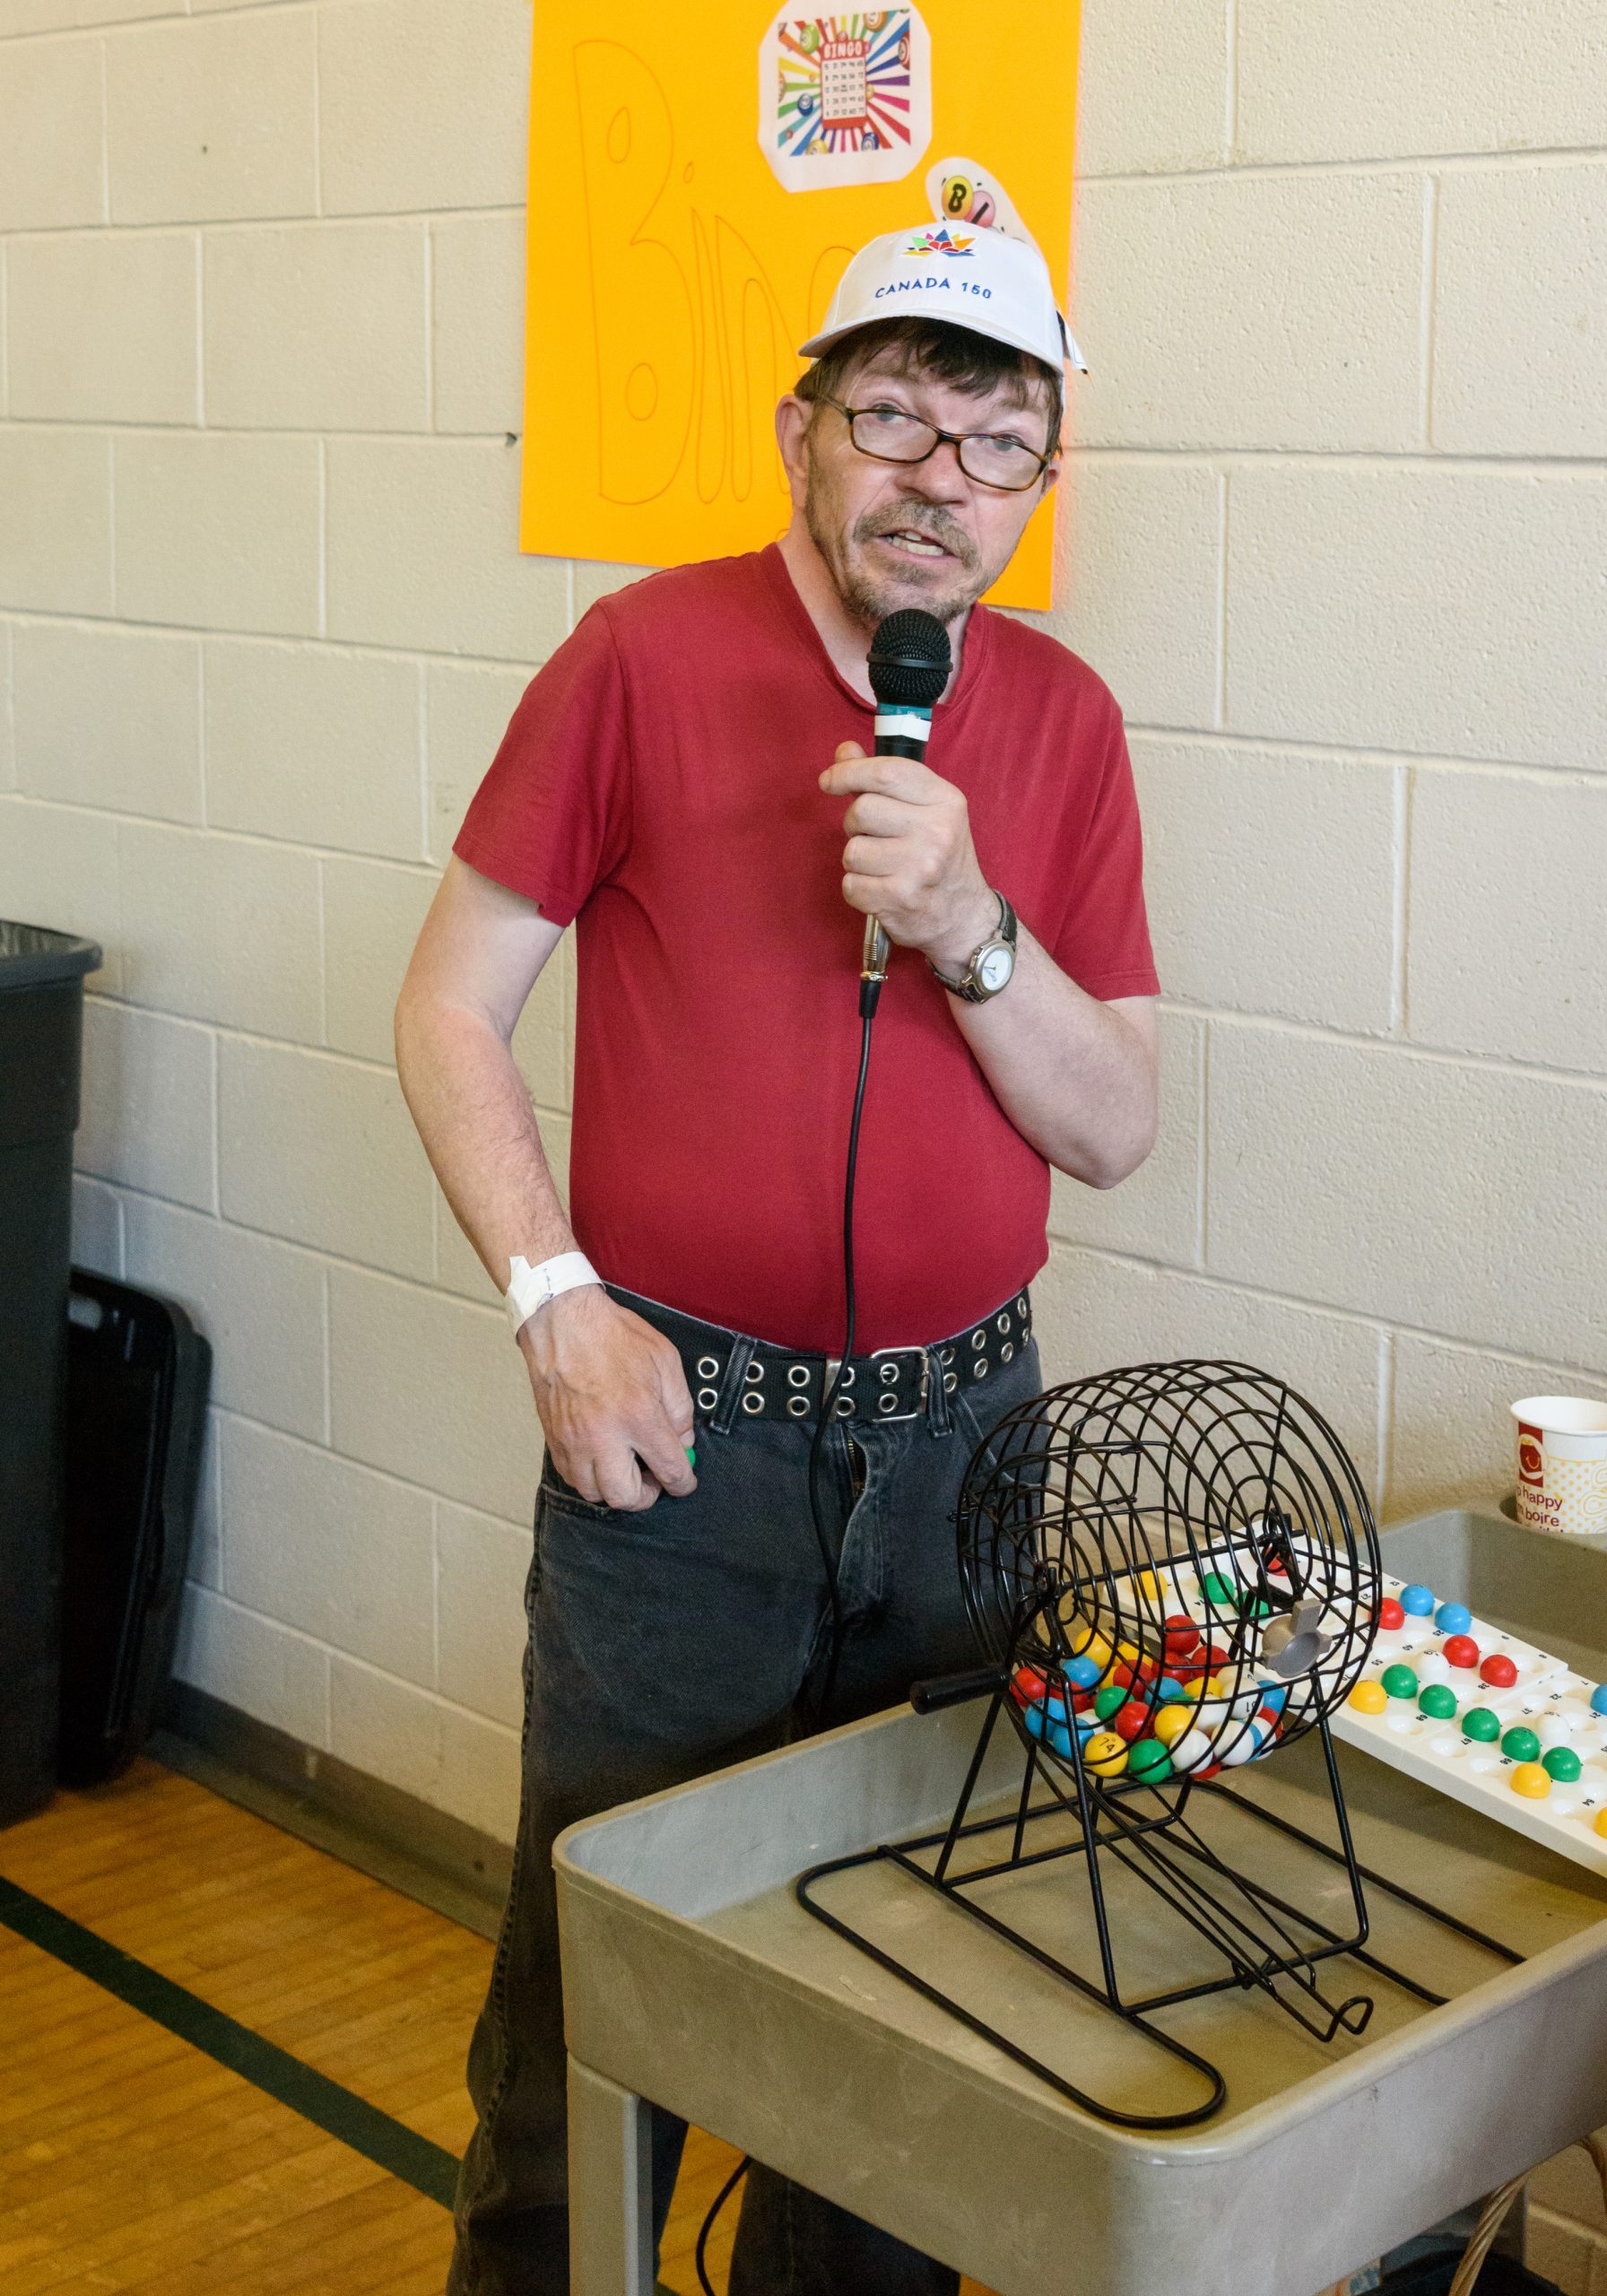 The announcer of a bingo game. Holding a microphone standing behind the BINGO numbers draw.